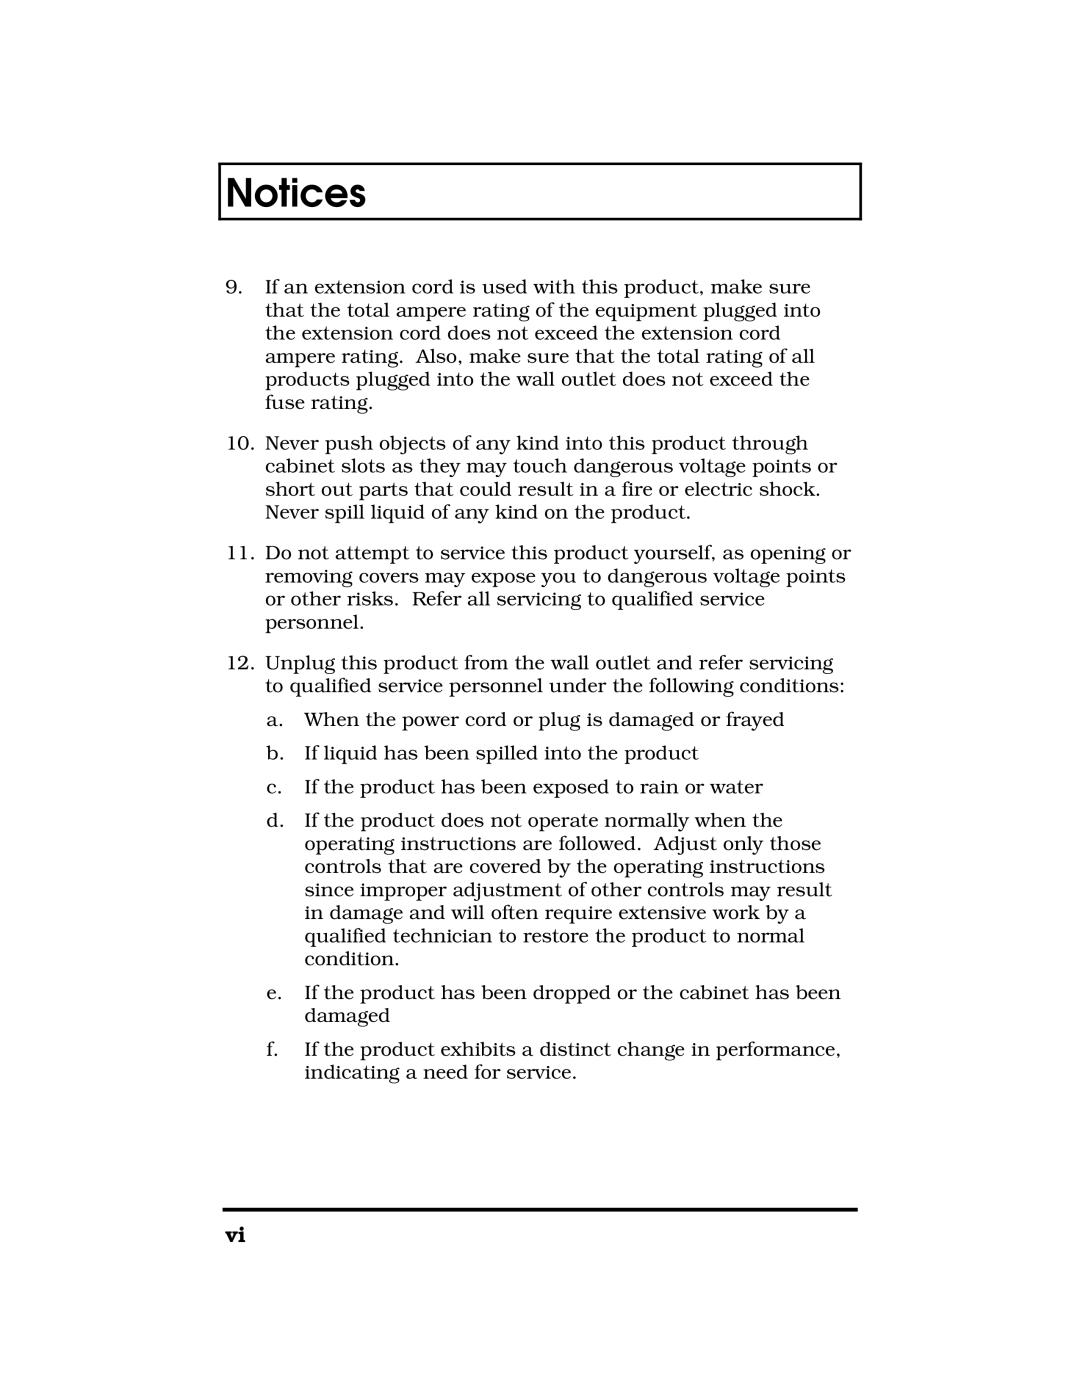 Acer 390 Series manual Notices, a. When the power cord or plug is damaged or frayed 